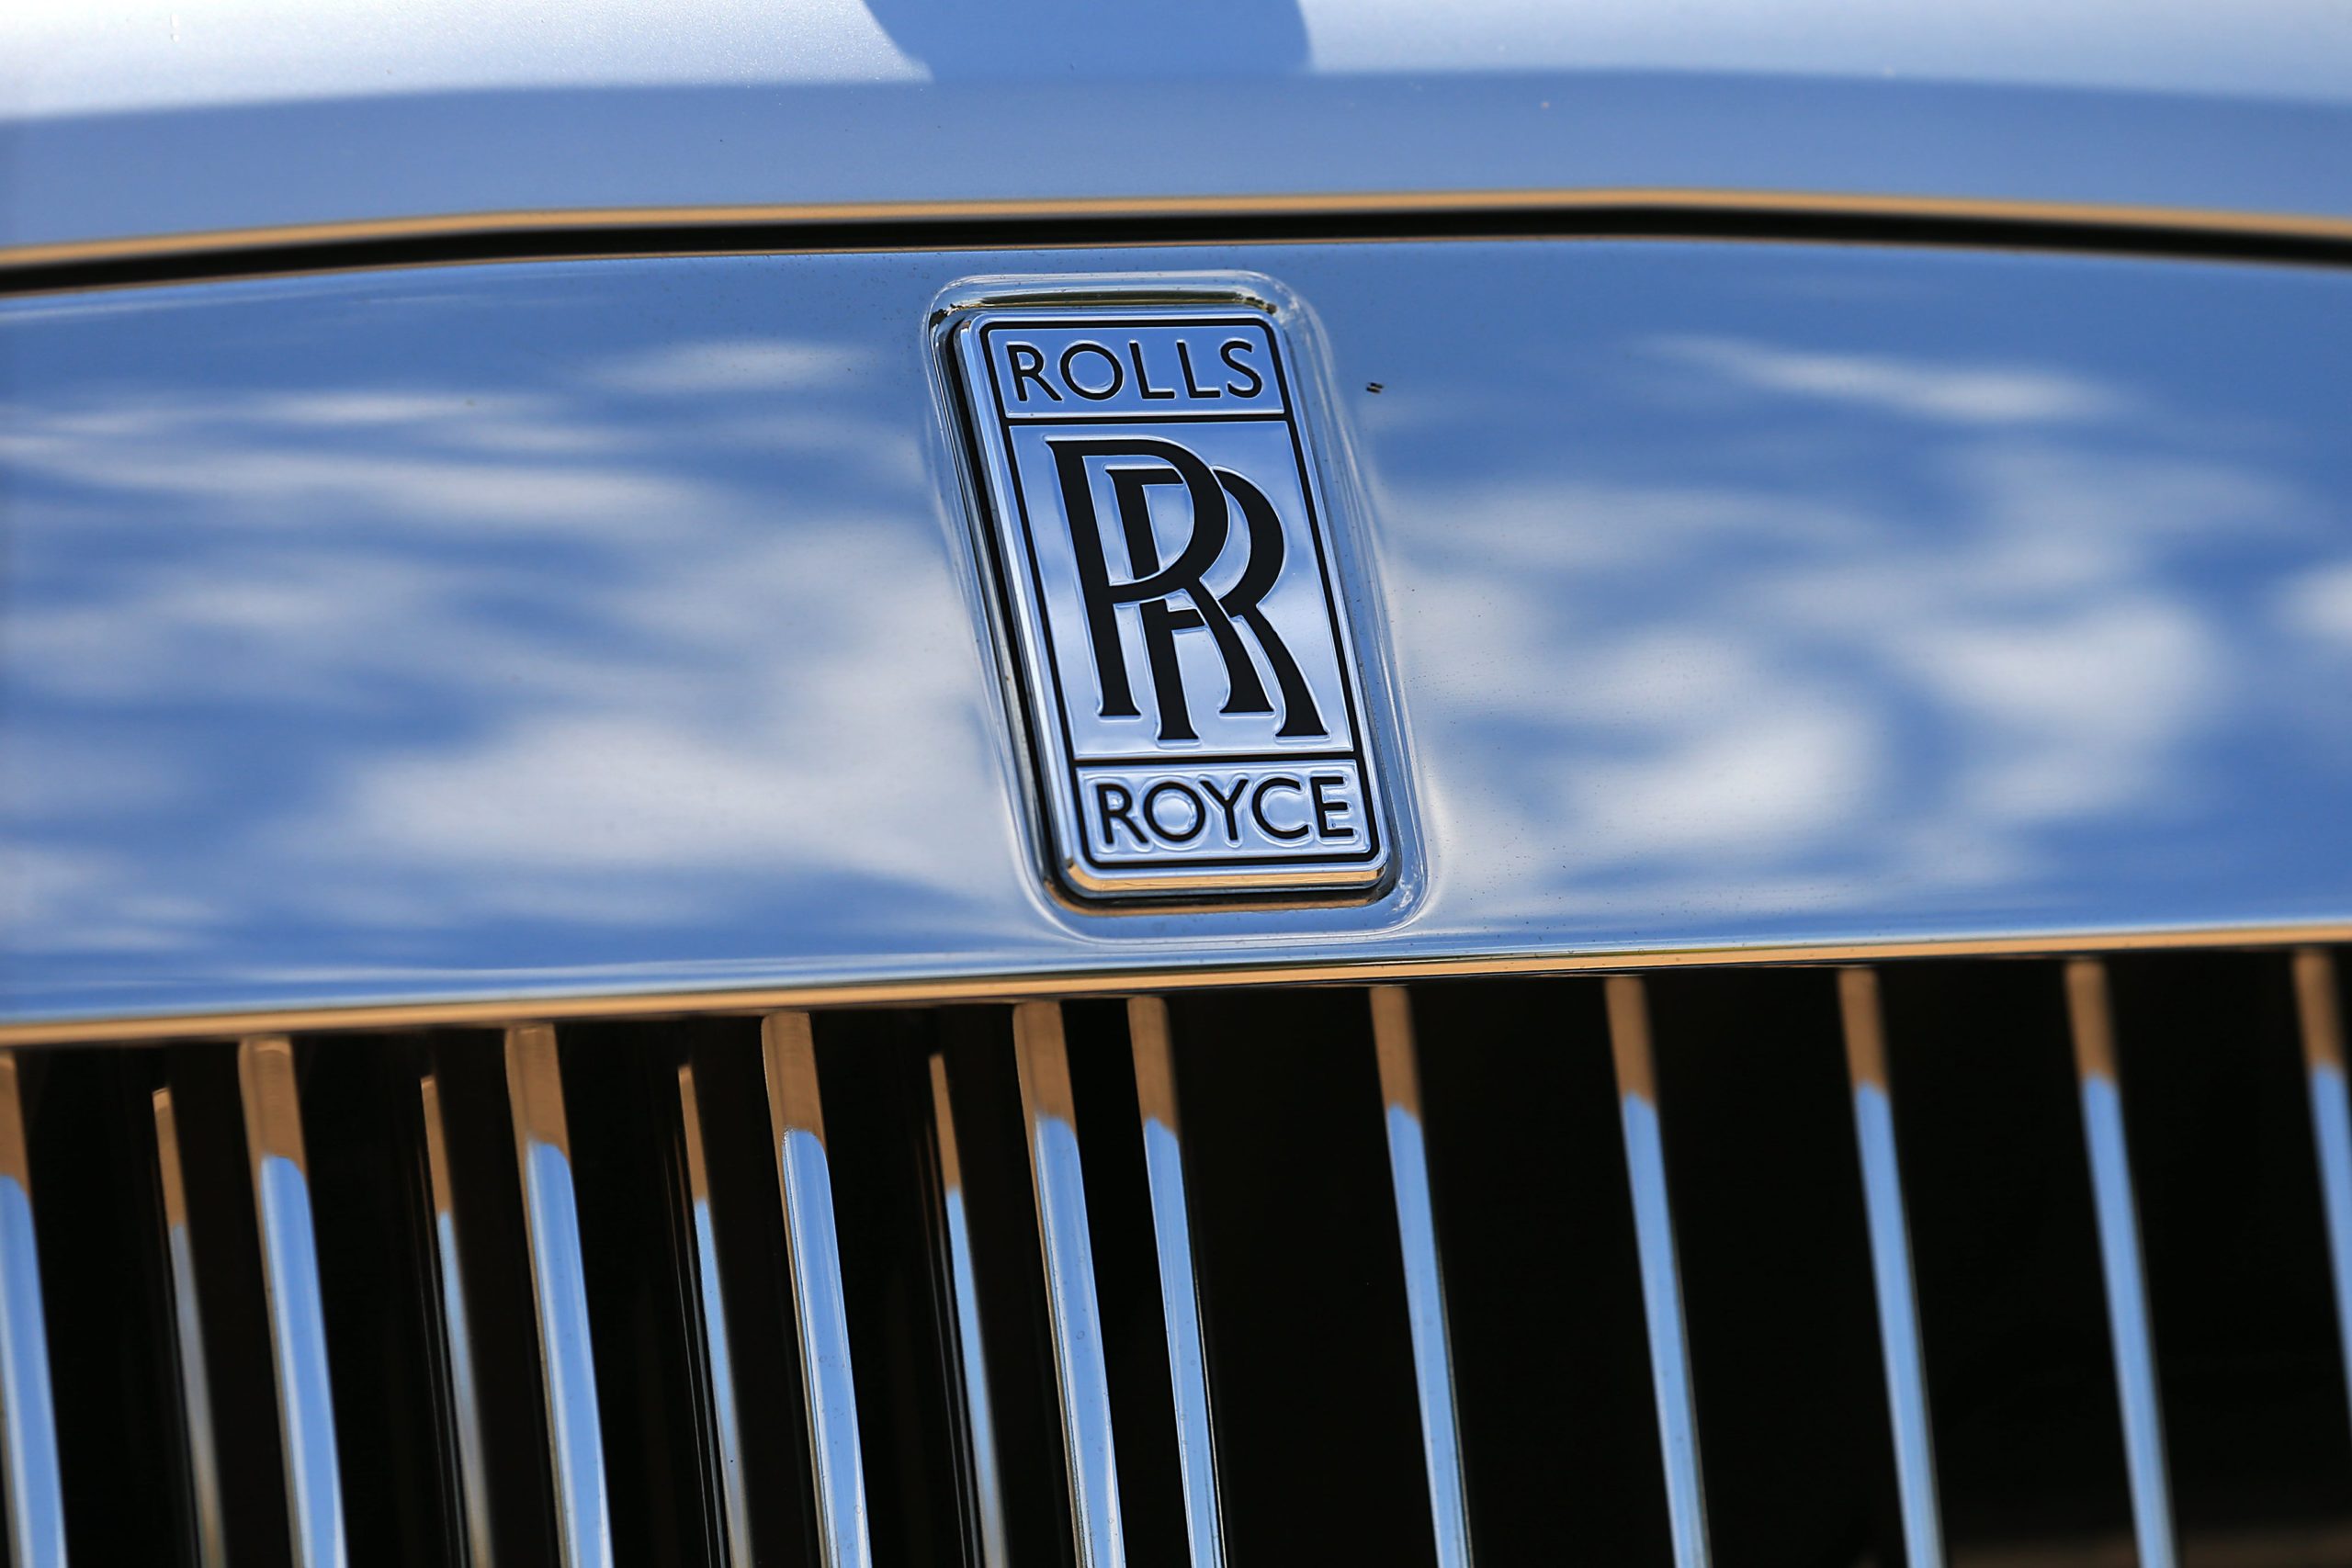 Rolls-Royce boss says Covid deaths boosted car sales: ‘People realised life is short’